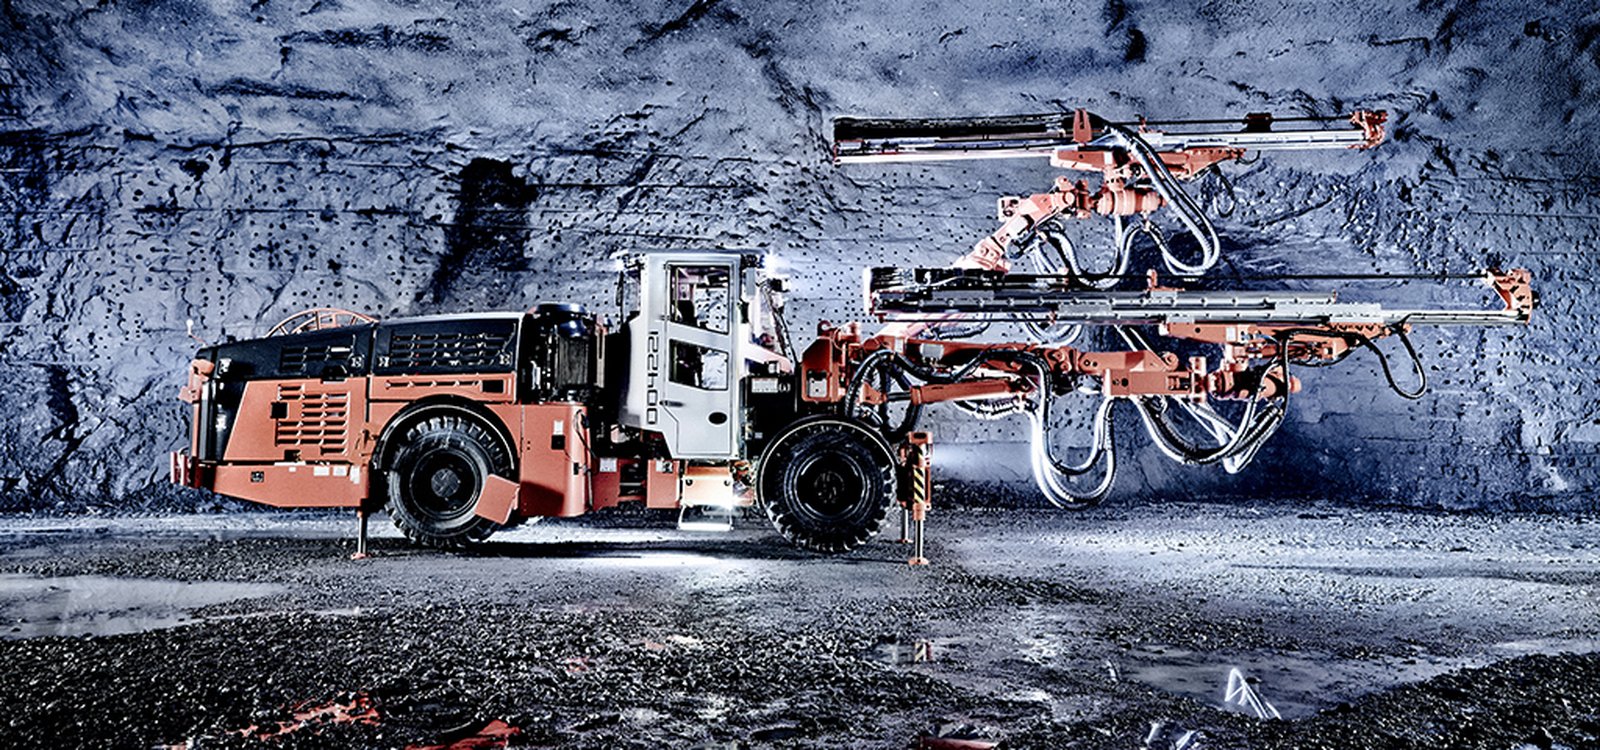 The Sandvik DD422i drill rig offers a wide range of new features to improve excavation of tunnels in hard rock mines.